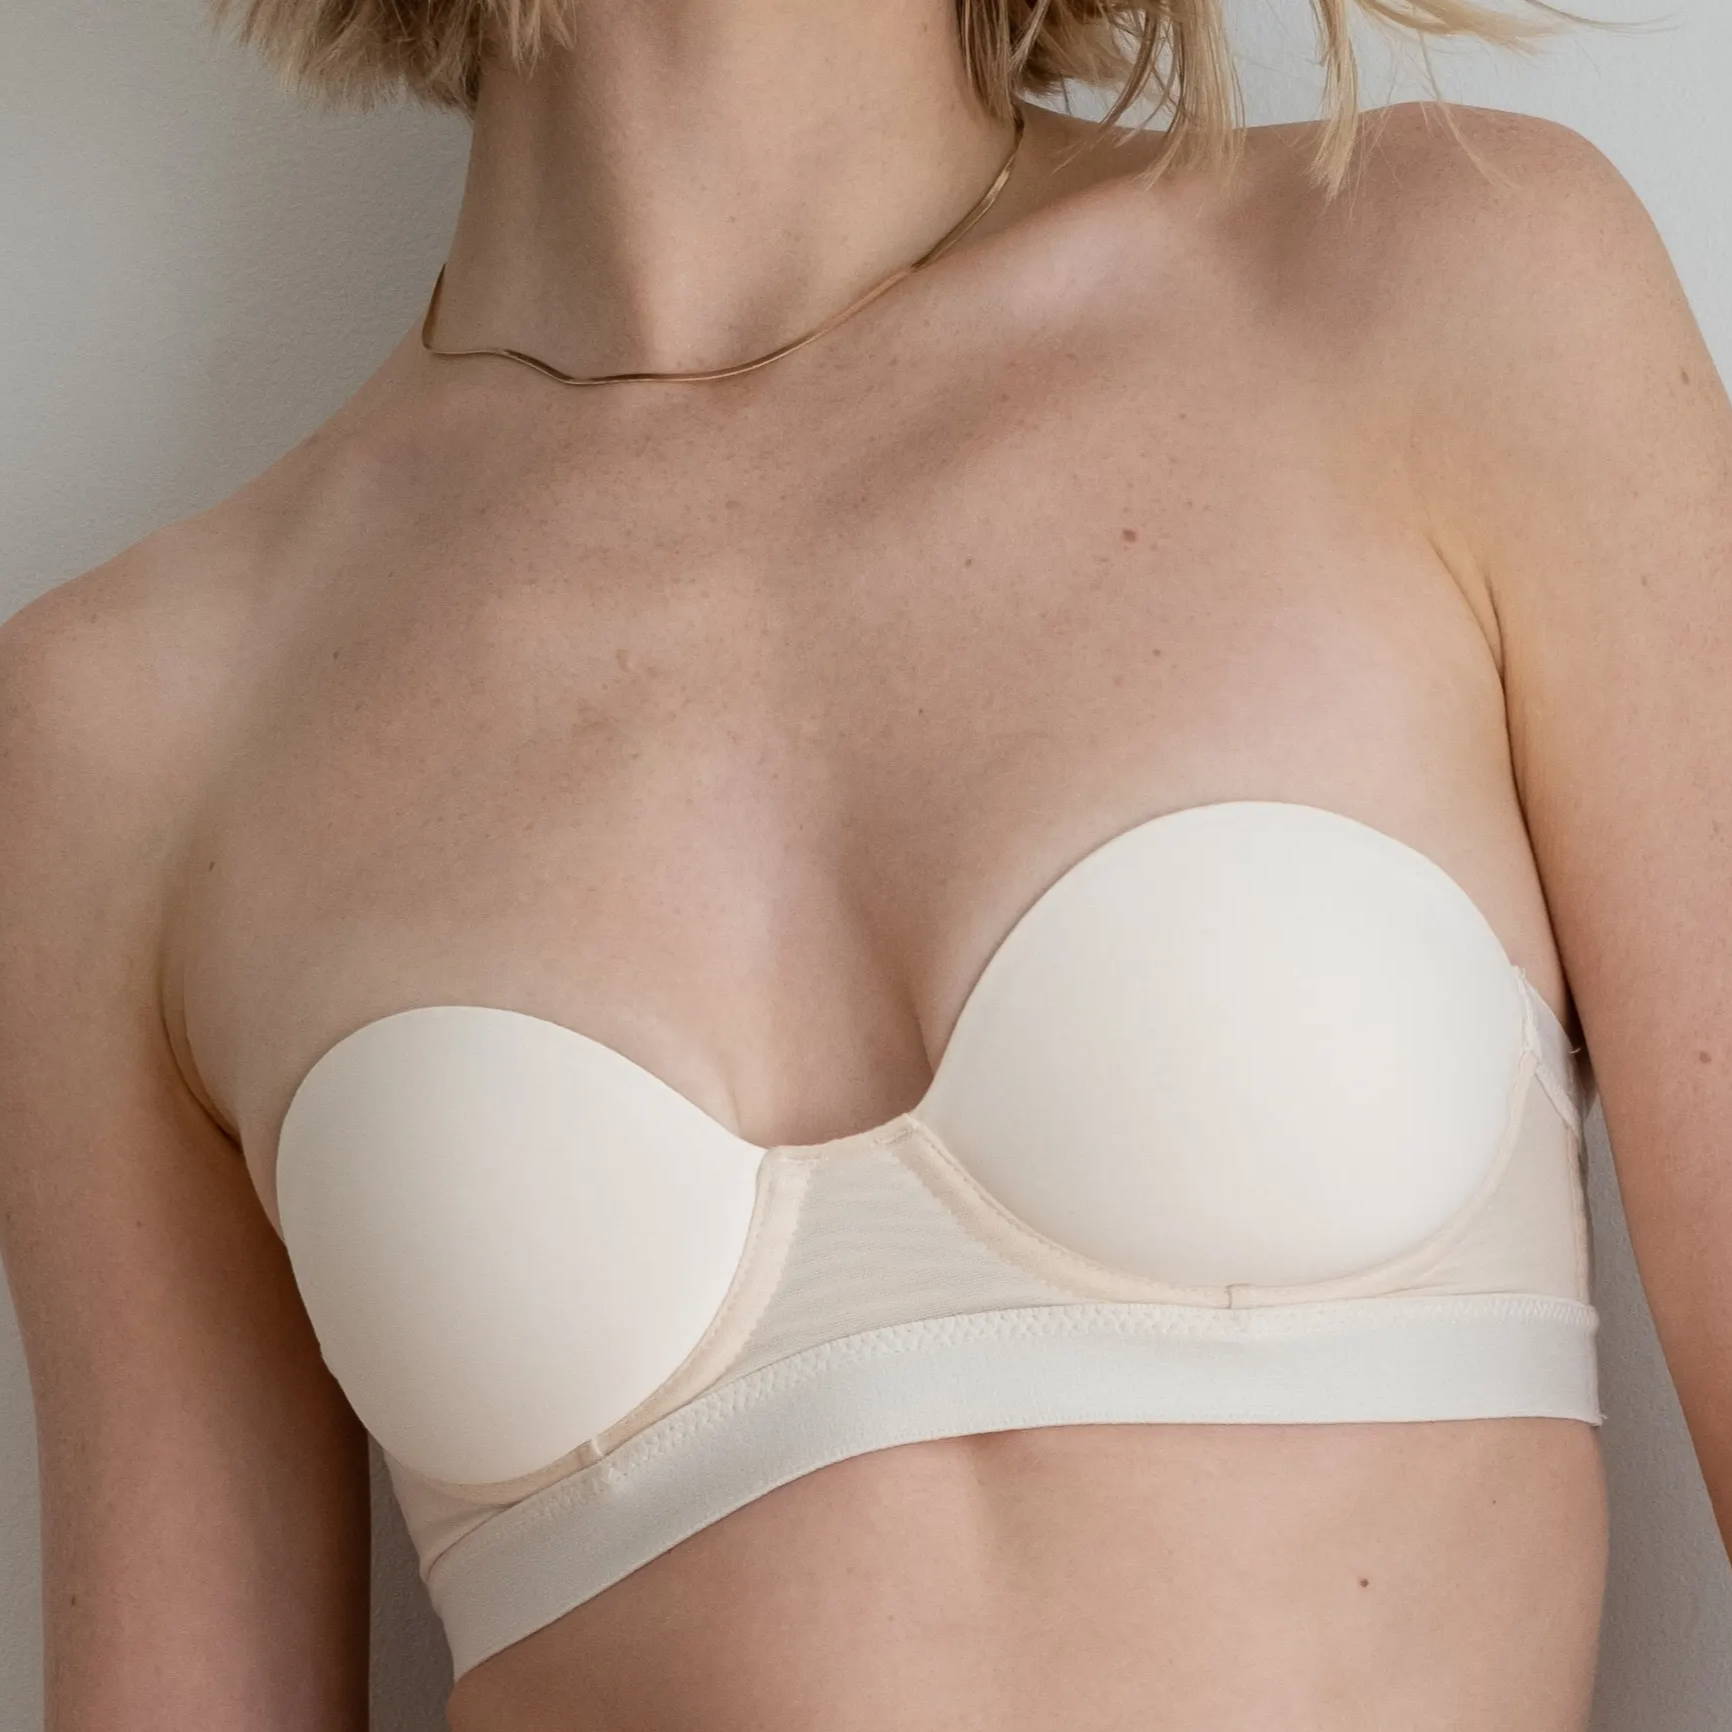 32a bra the best bras for small busts in white strapless